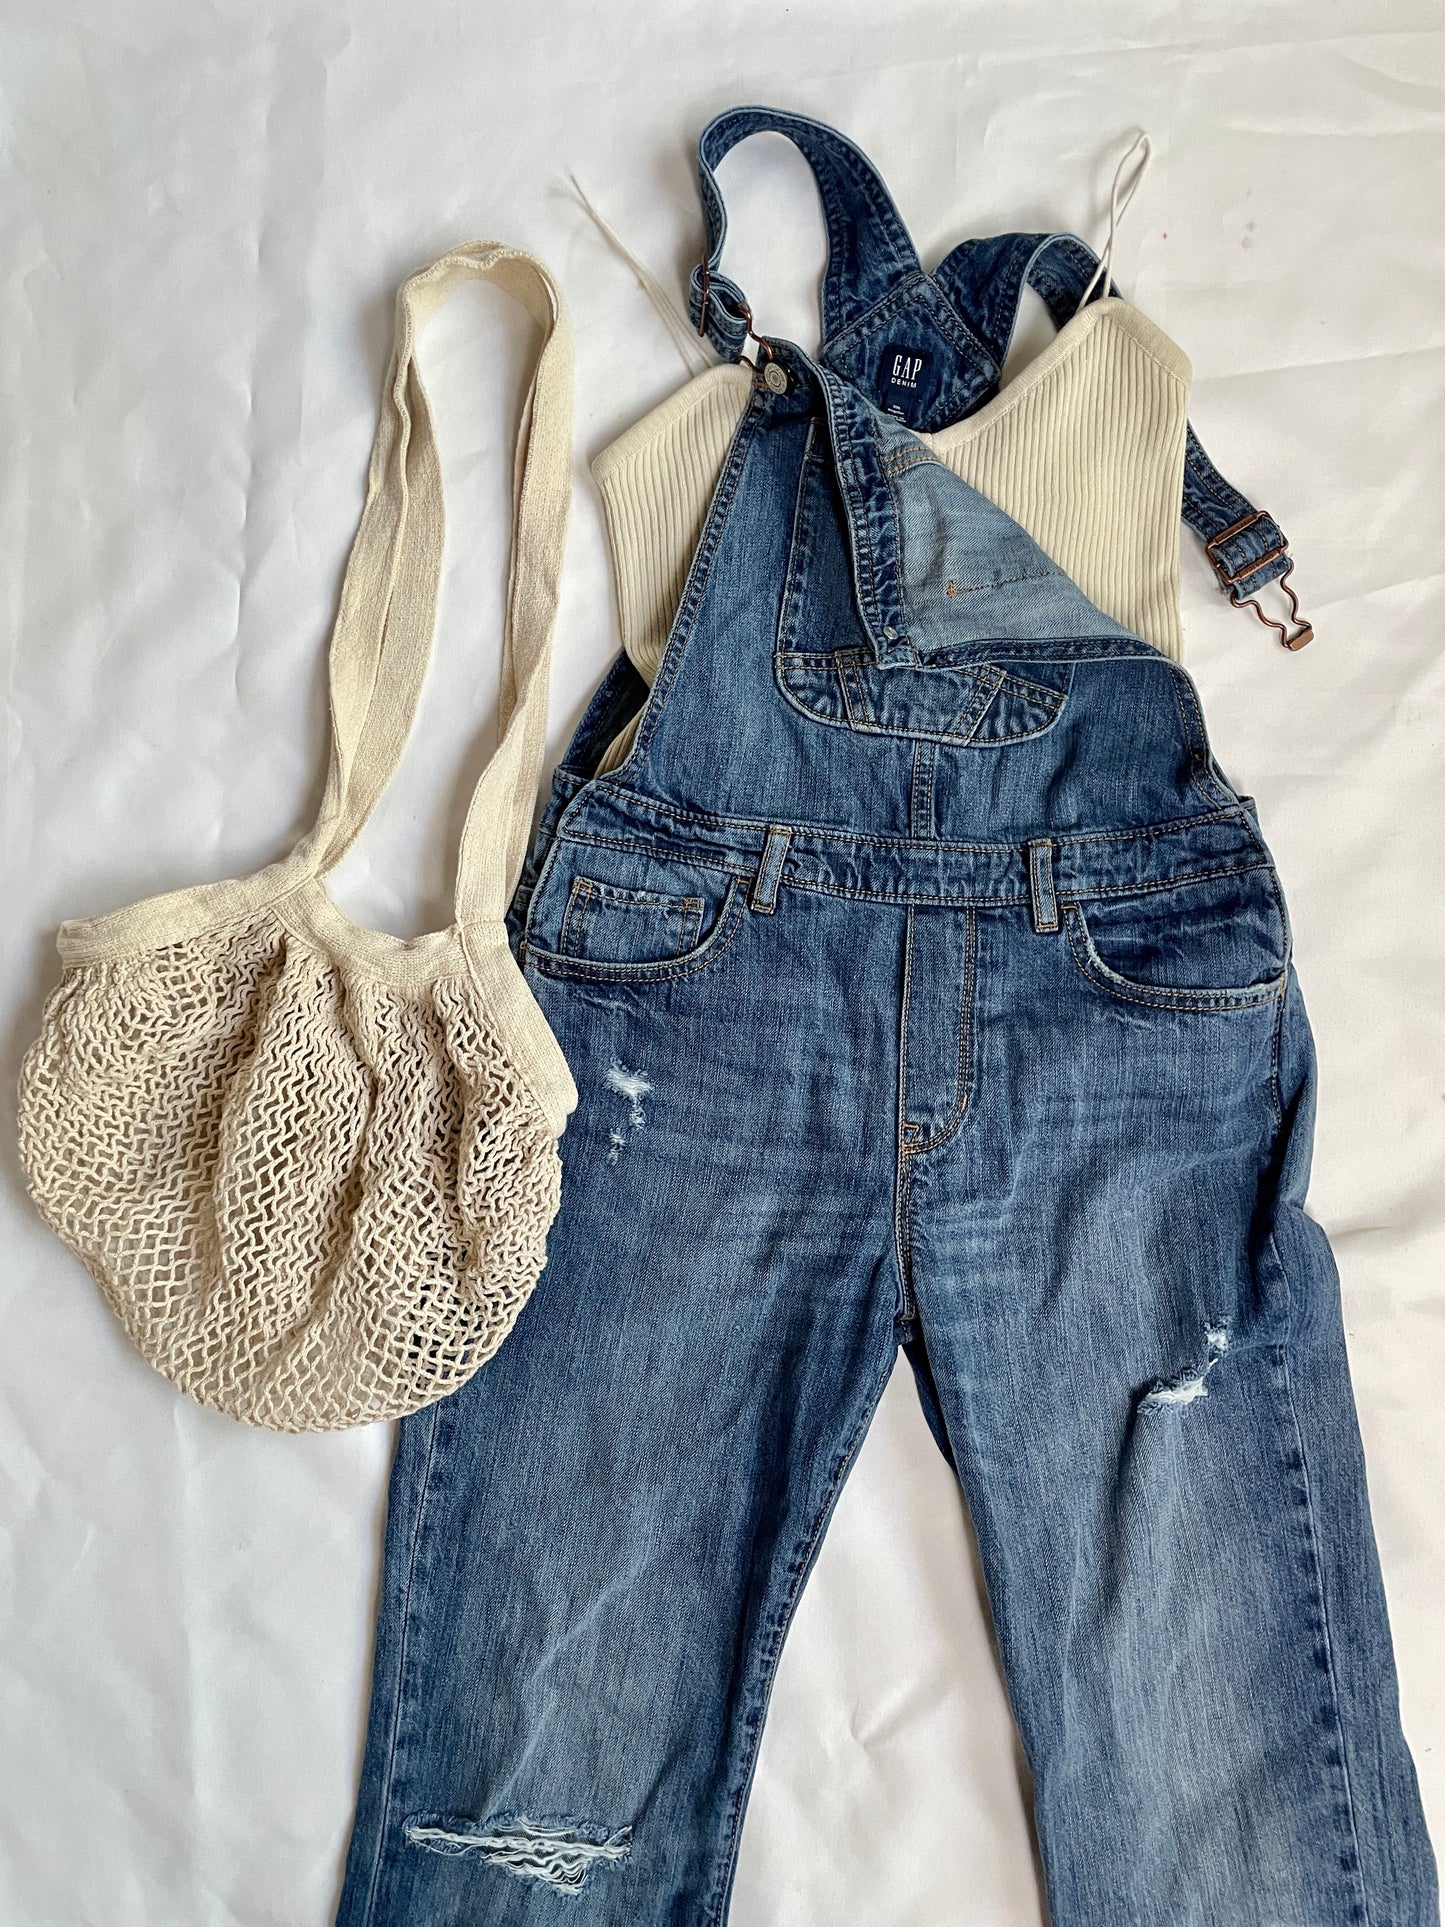 FALL inspired outfit bundle - tank top + overalls + bag